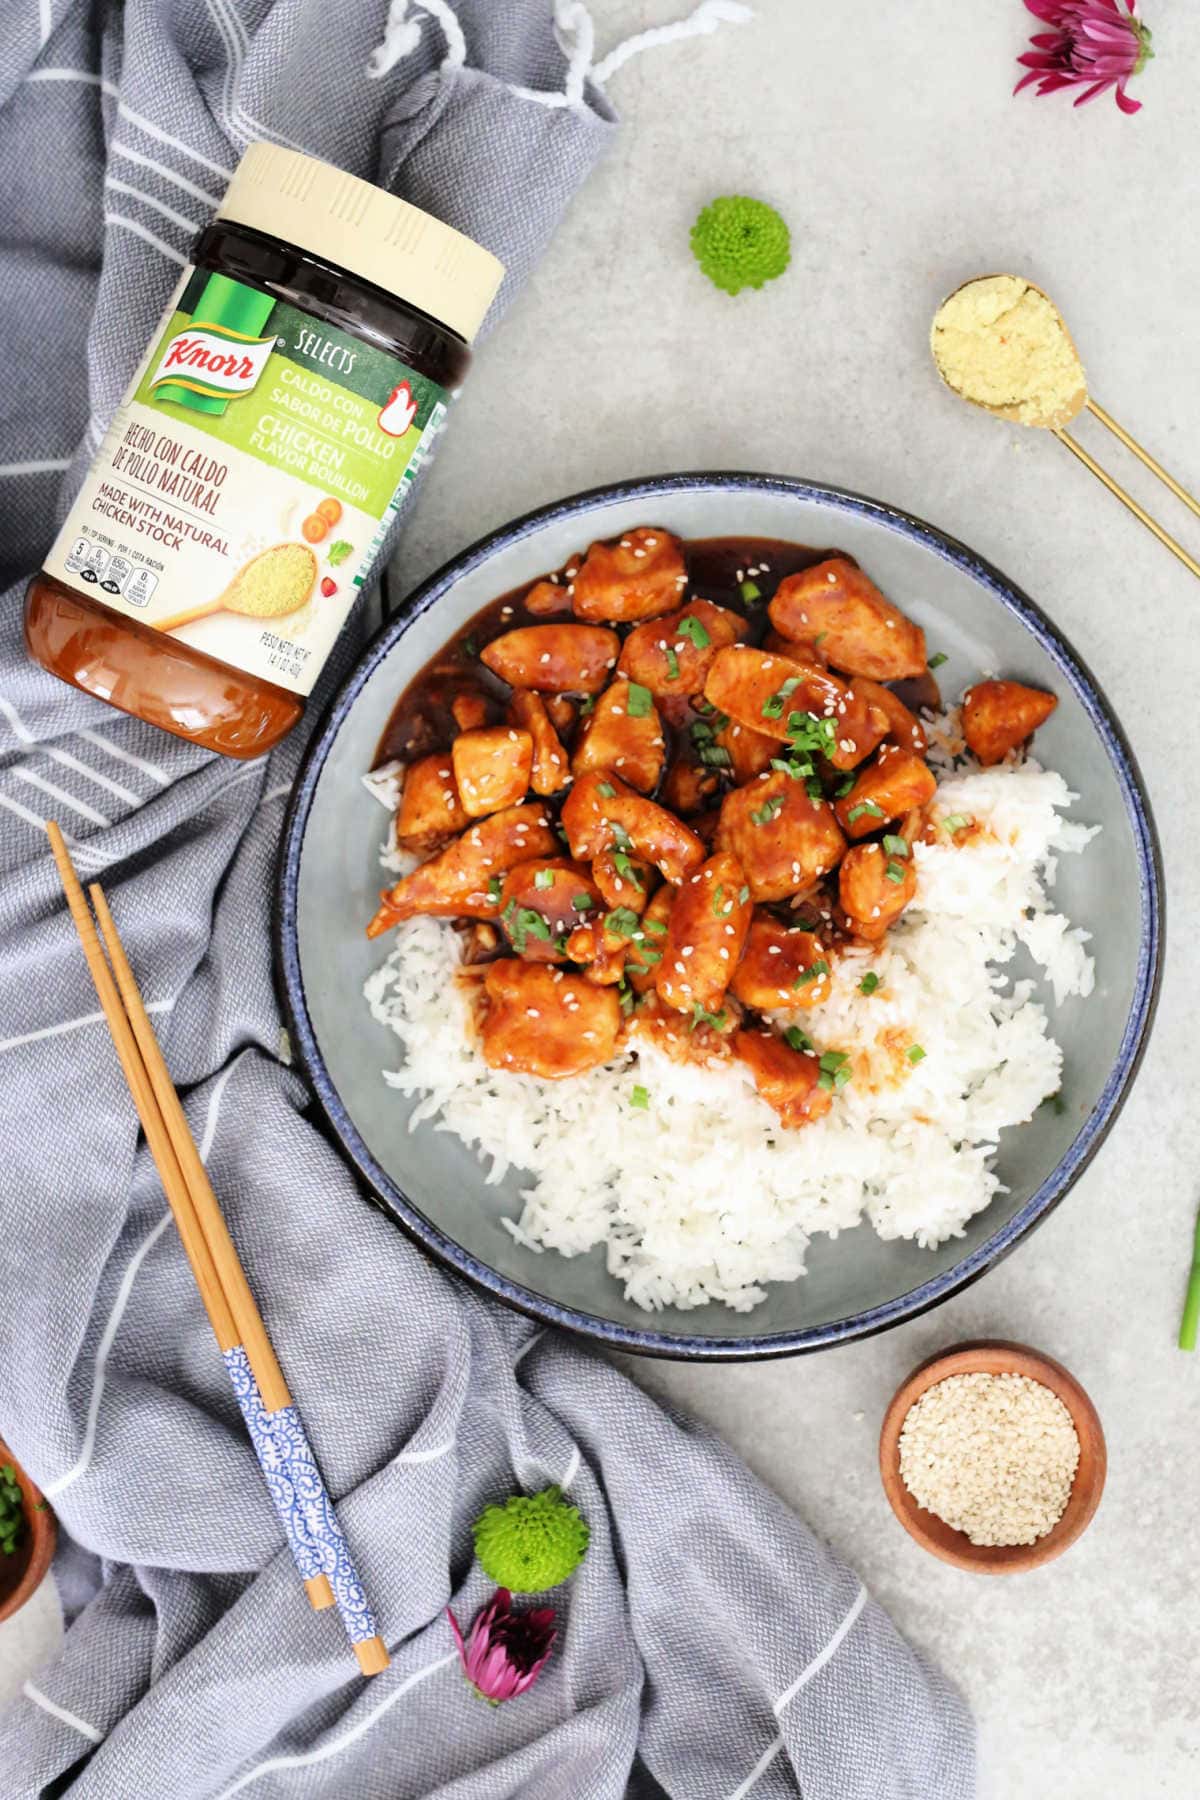 easy sweet and sour chicken recipe over white rice on a plate